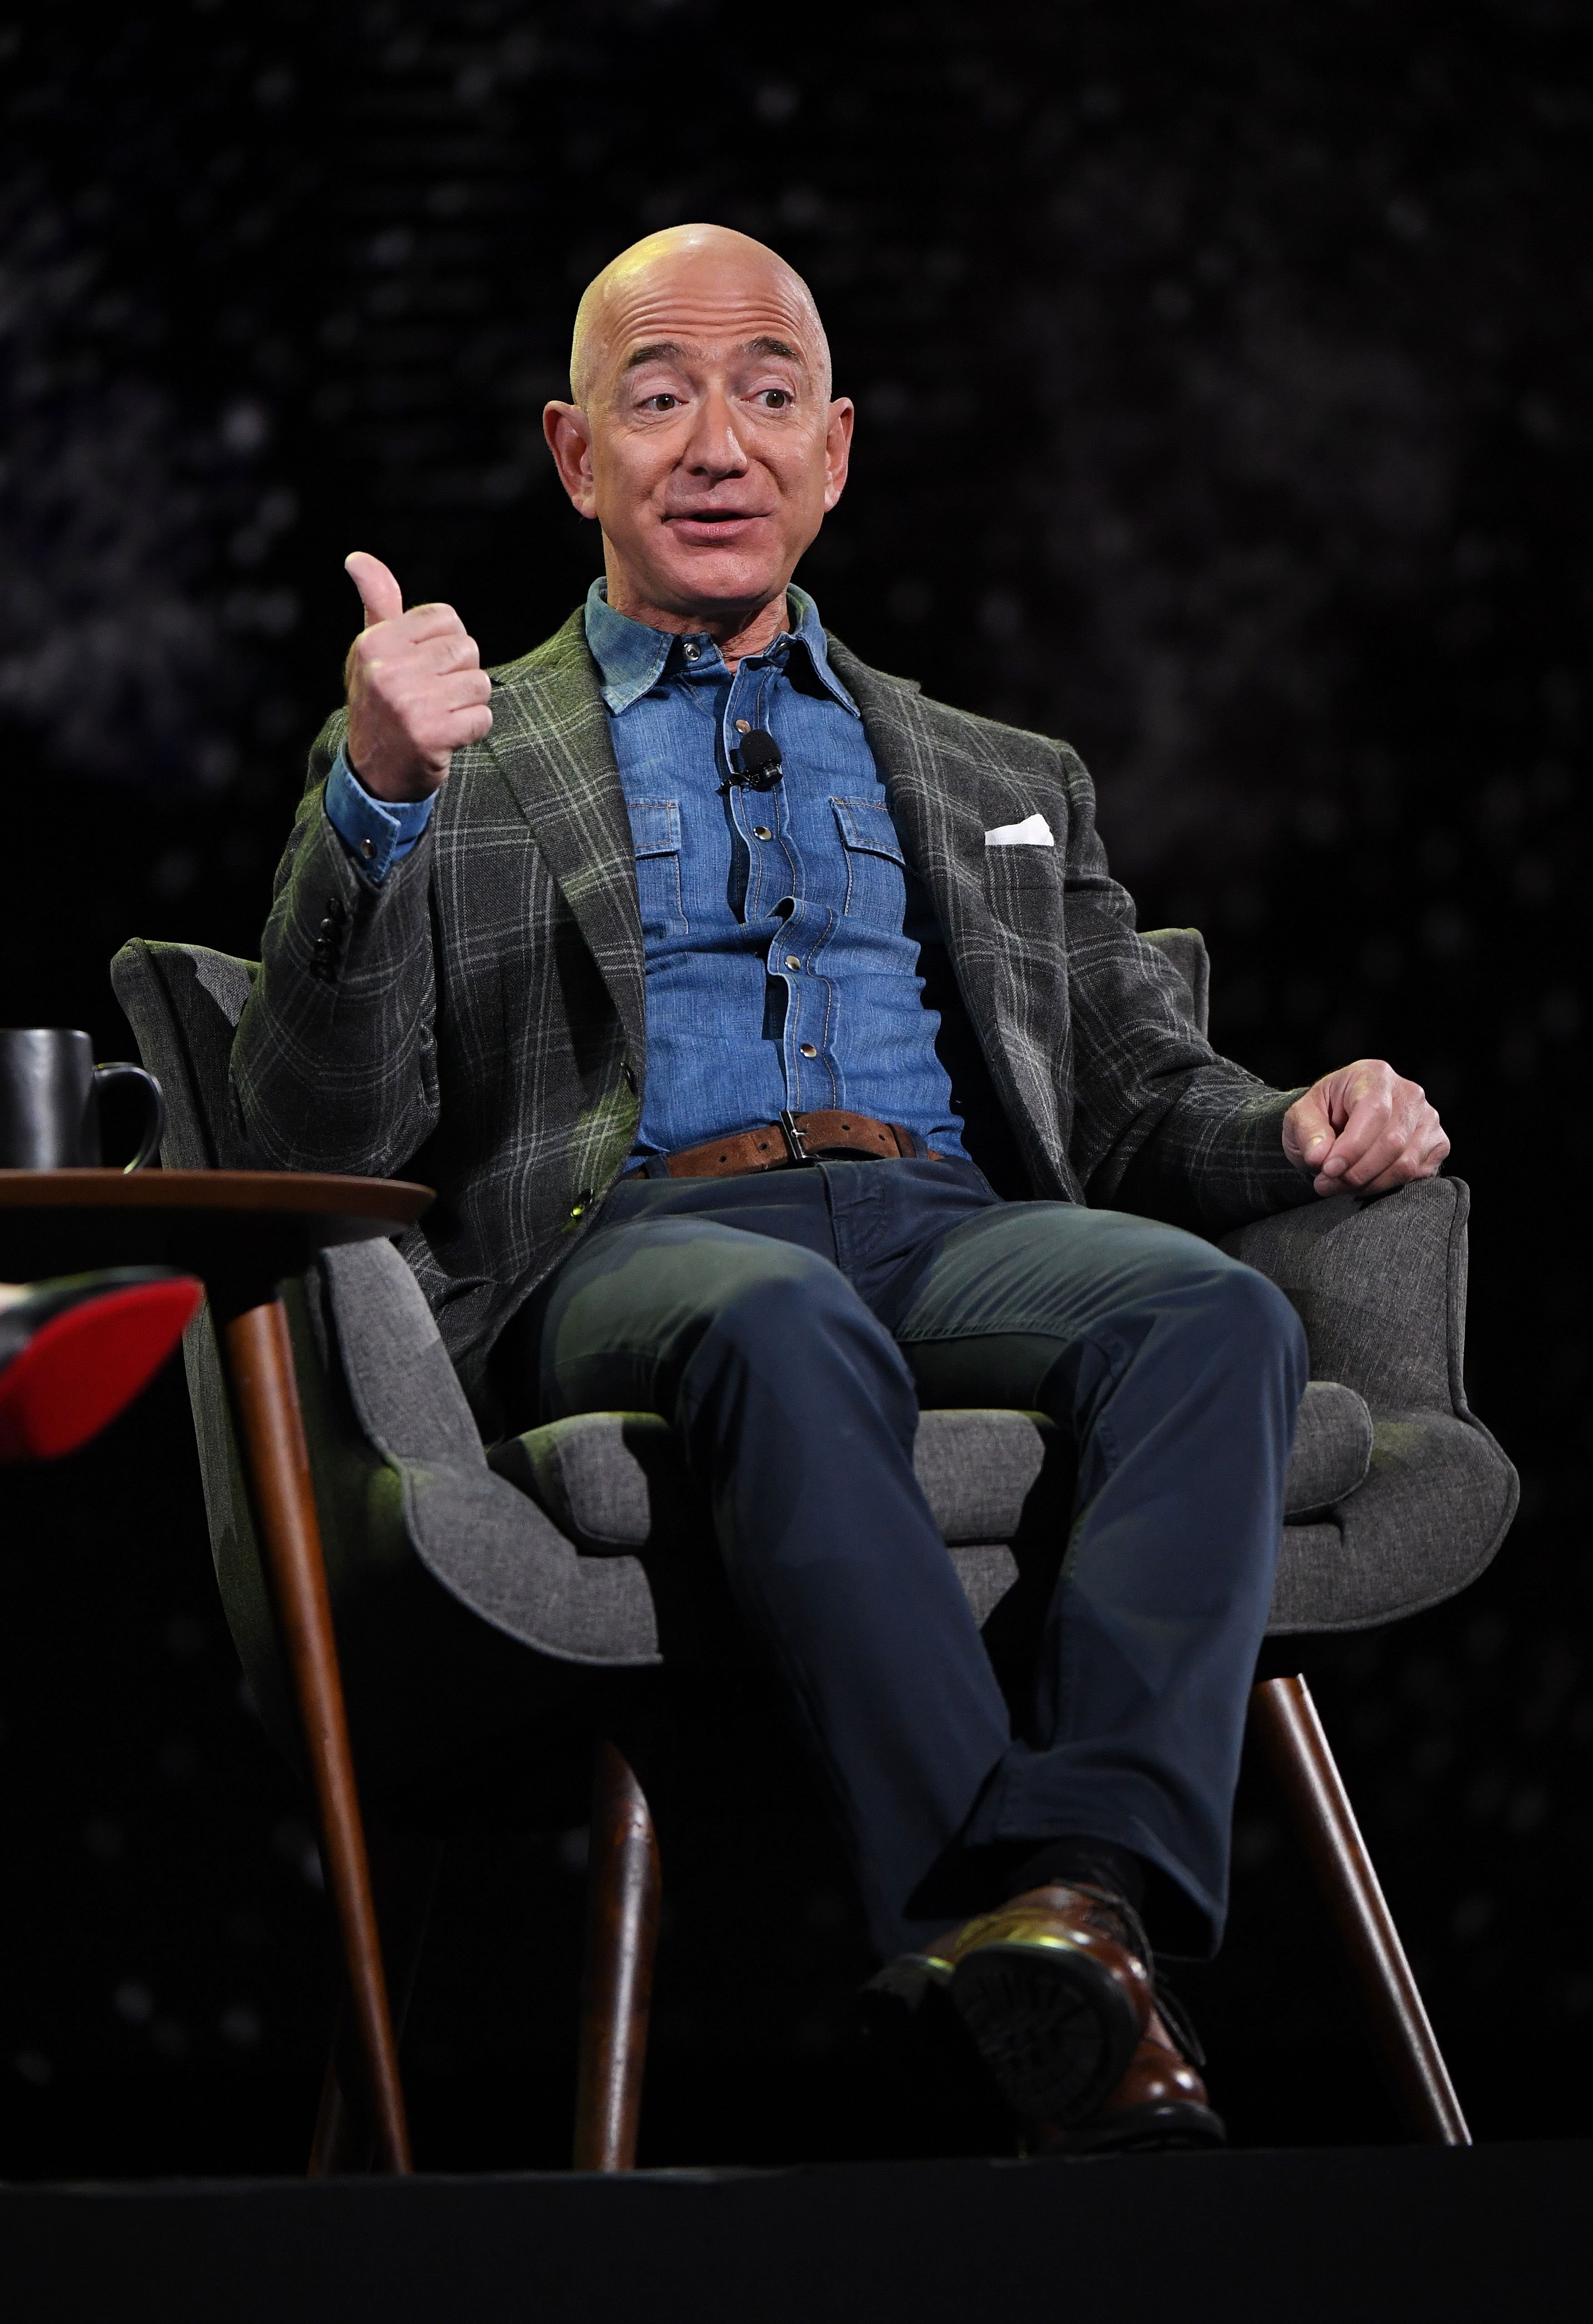 Jeff Bezos at an Amazon conference in Las Vegas on June 6, 2019 | Source: Getty Images 